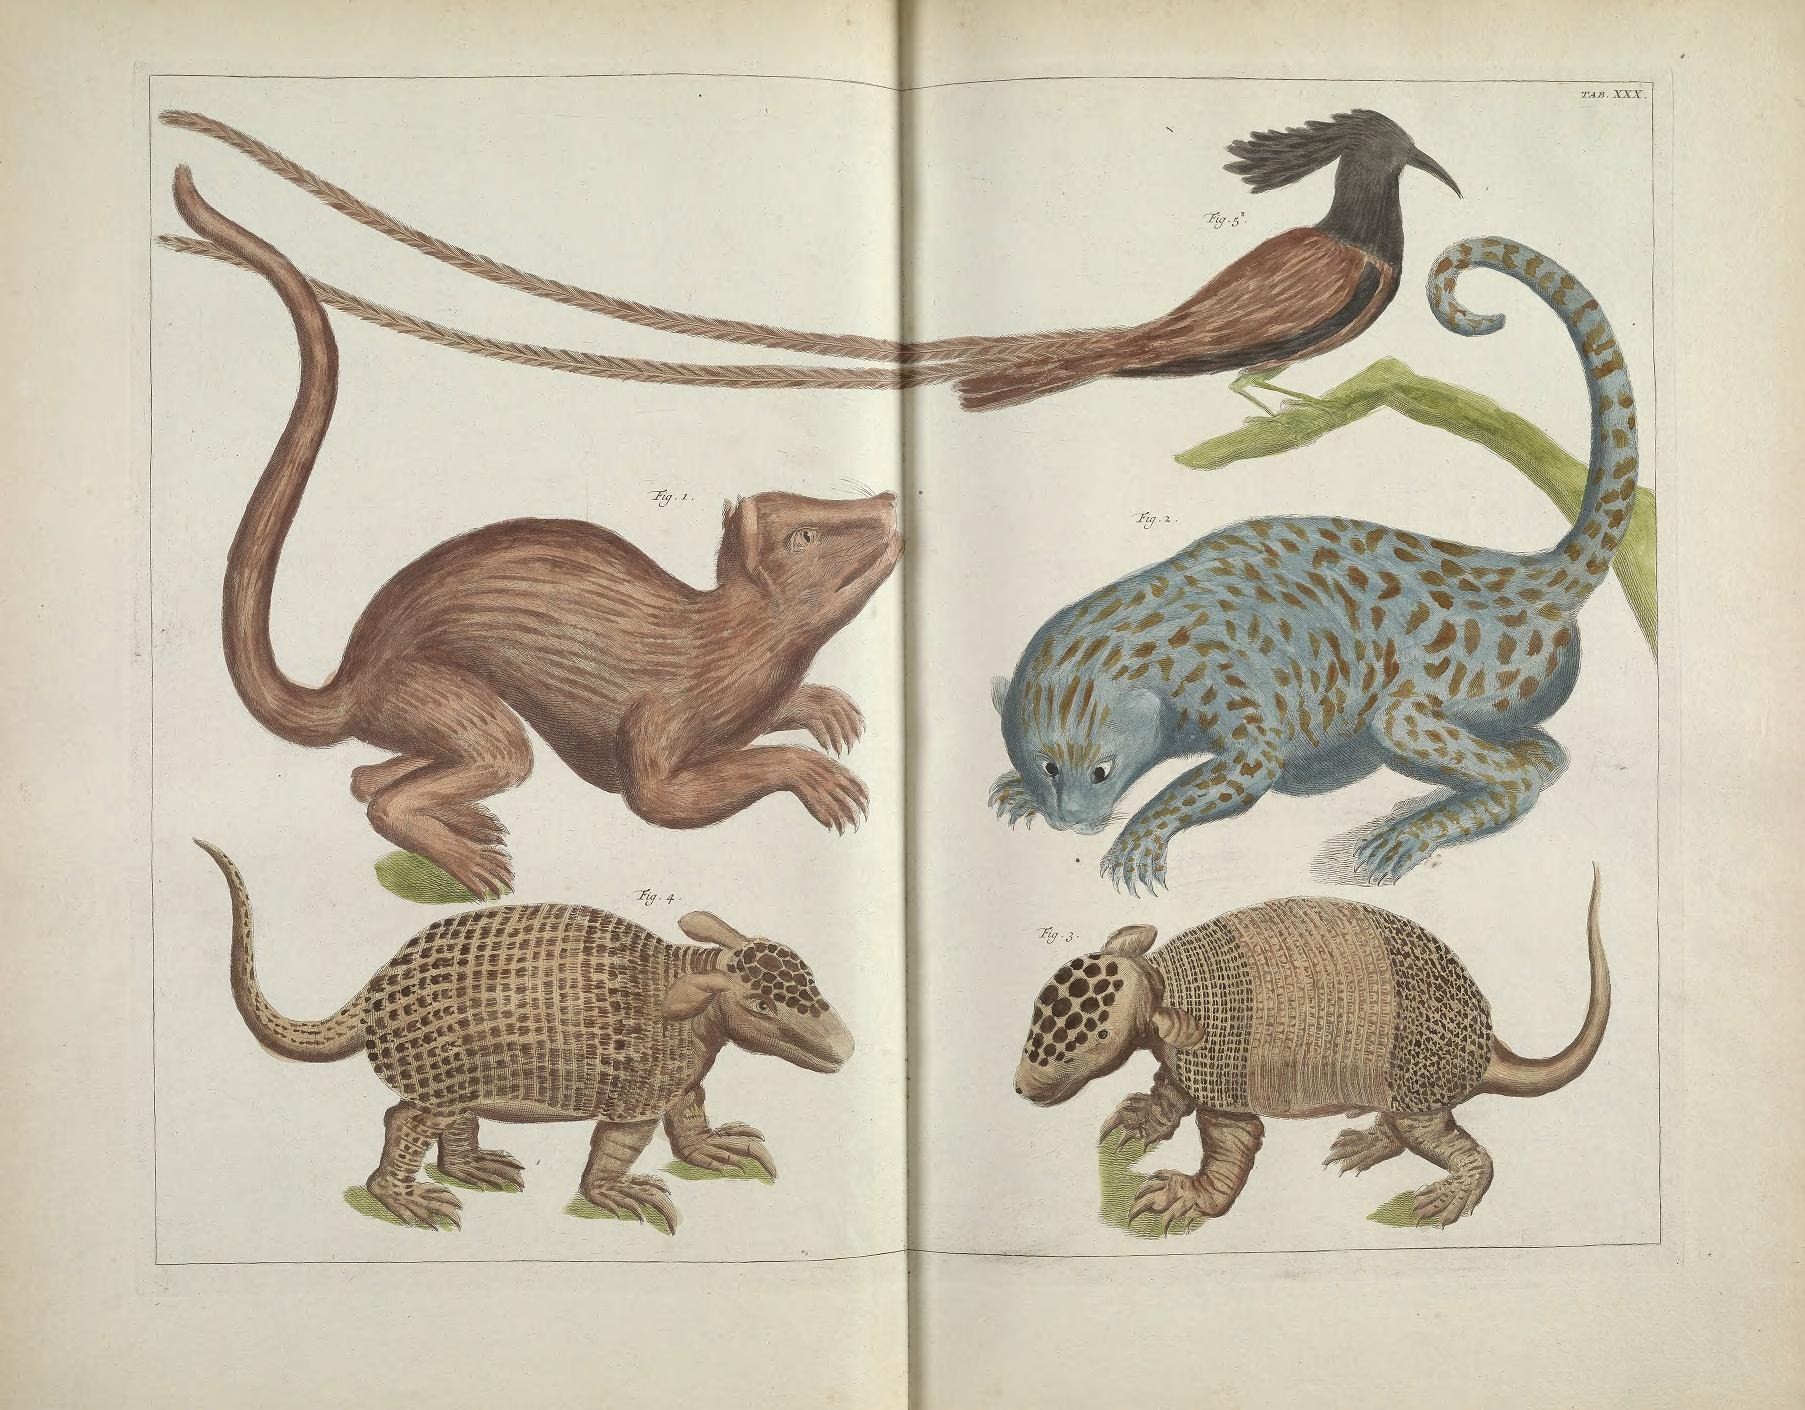 a book open with animals and plant life in it